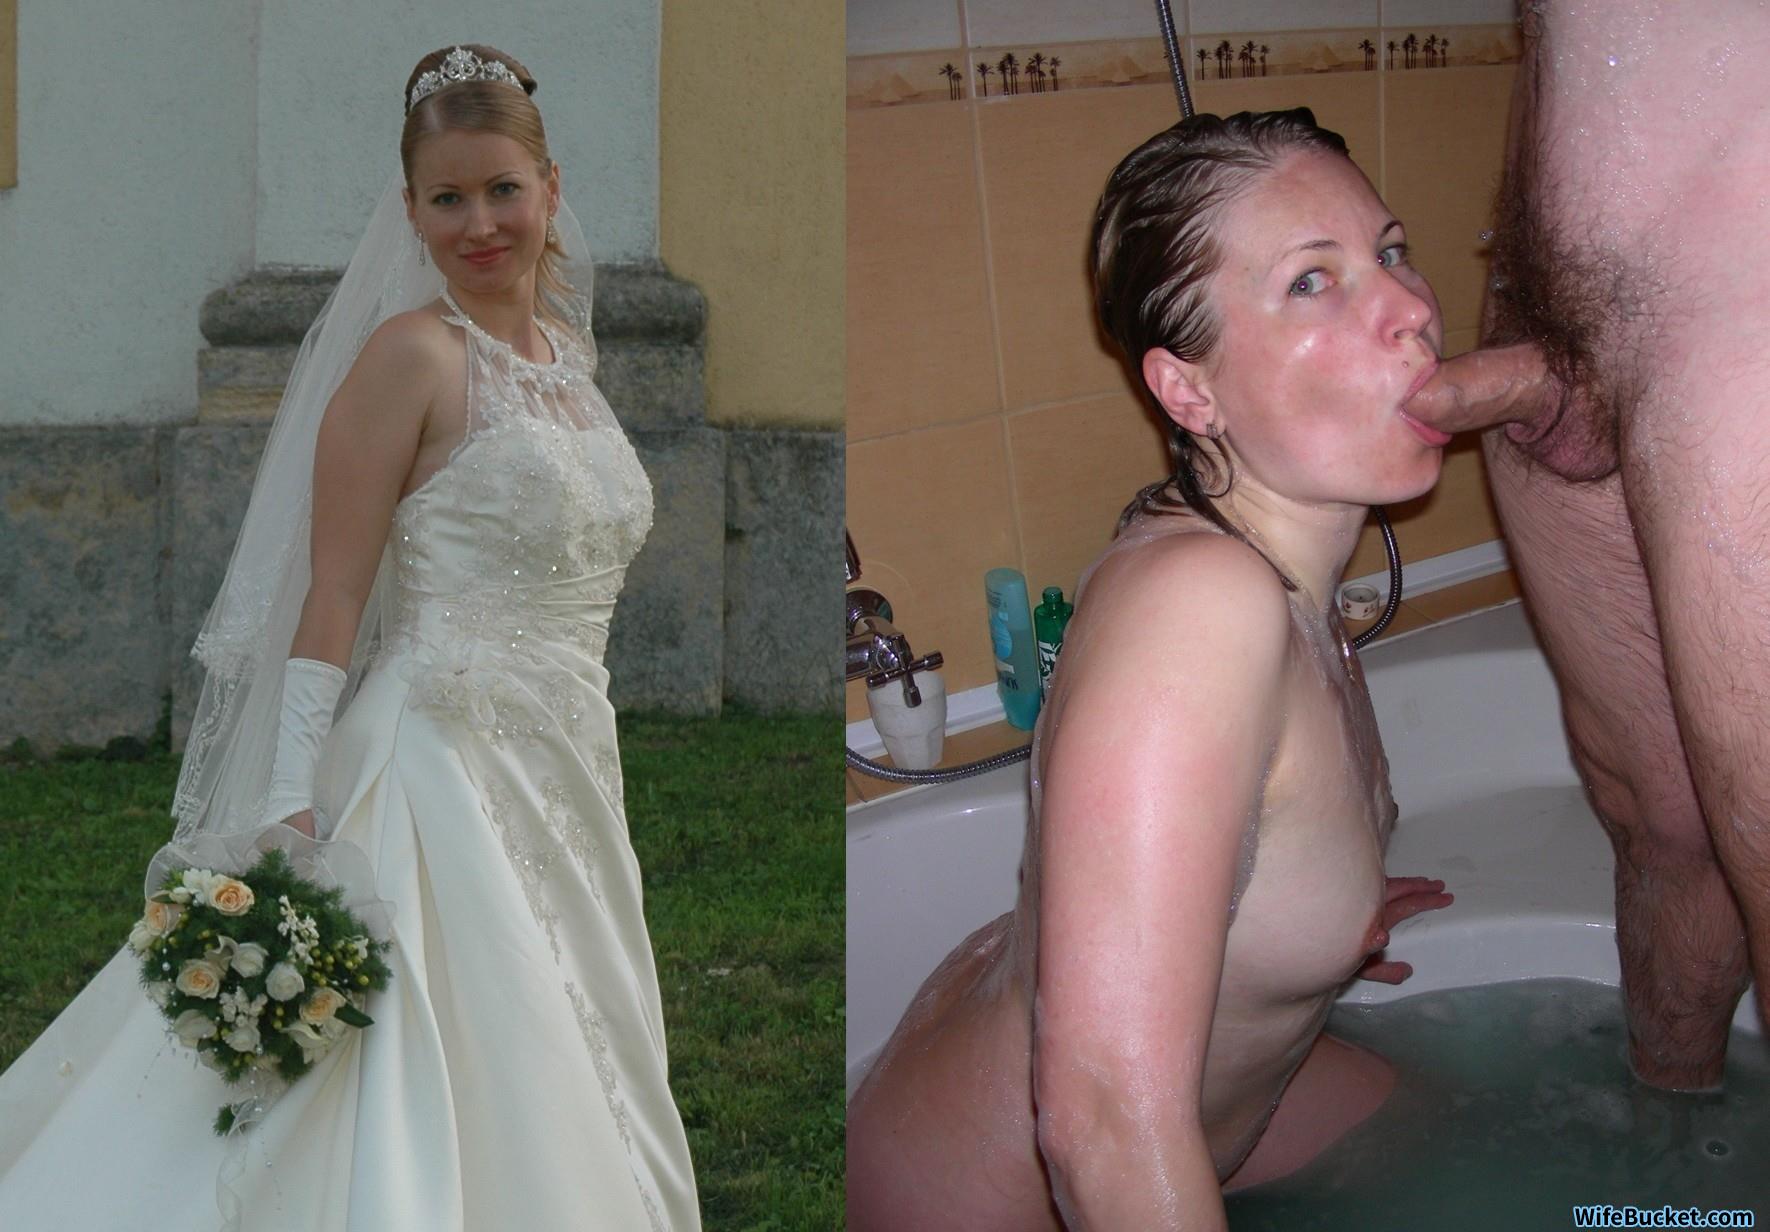 After Wedding Porn - Before-after nudes of sexy amateur brides! Some home porn, too :-) â€“  WifeBucket | Offical MILF Blog